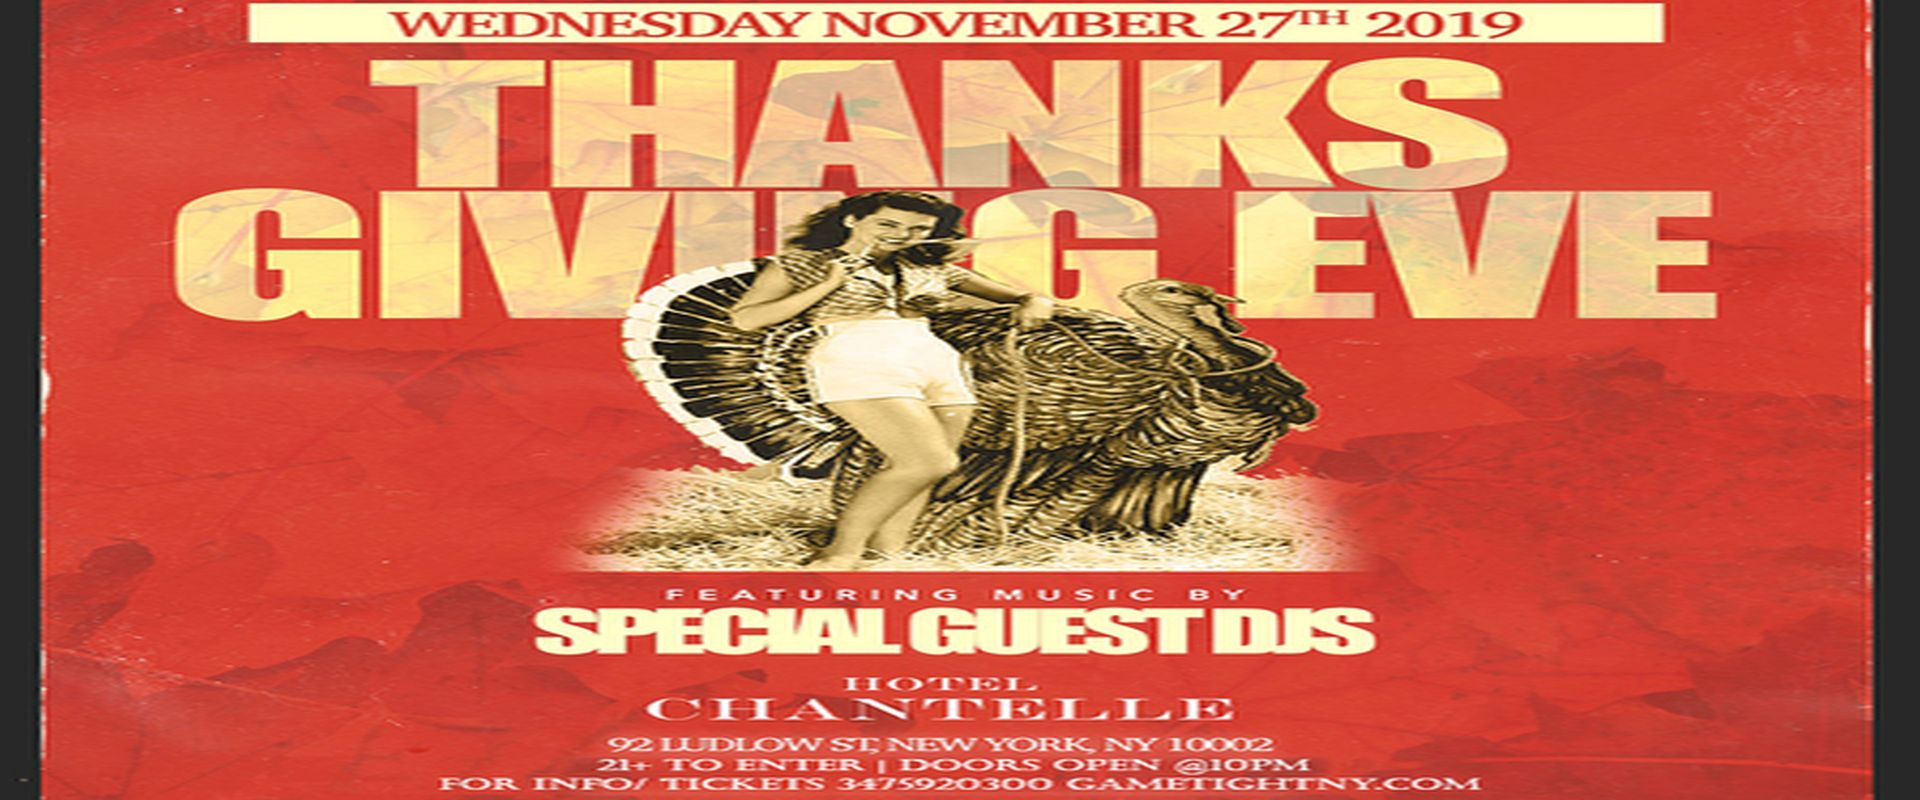 Hotel Chantelle Thanksgiving Eve party 2019, New York, United States